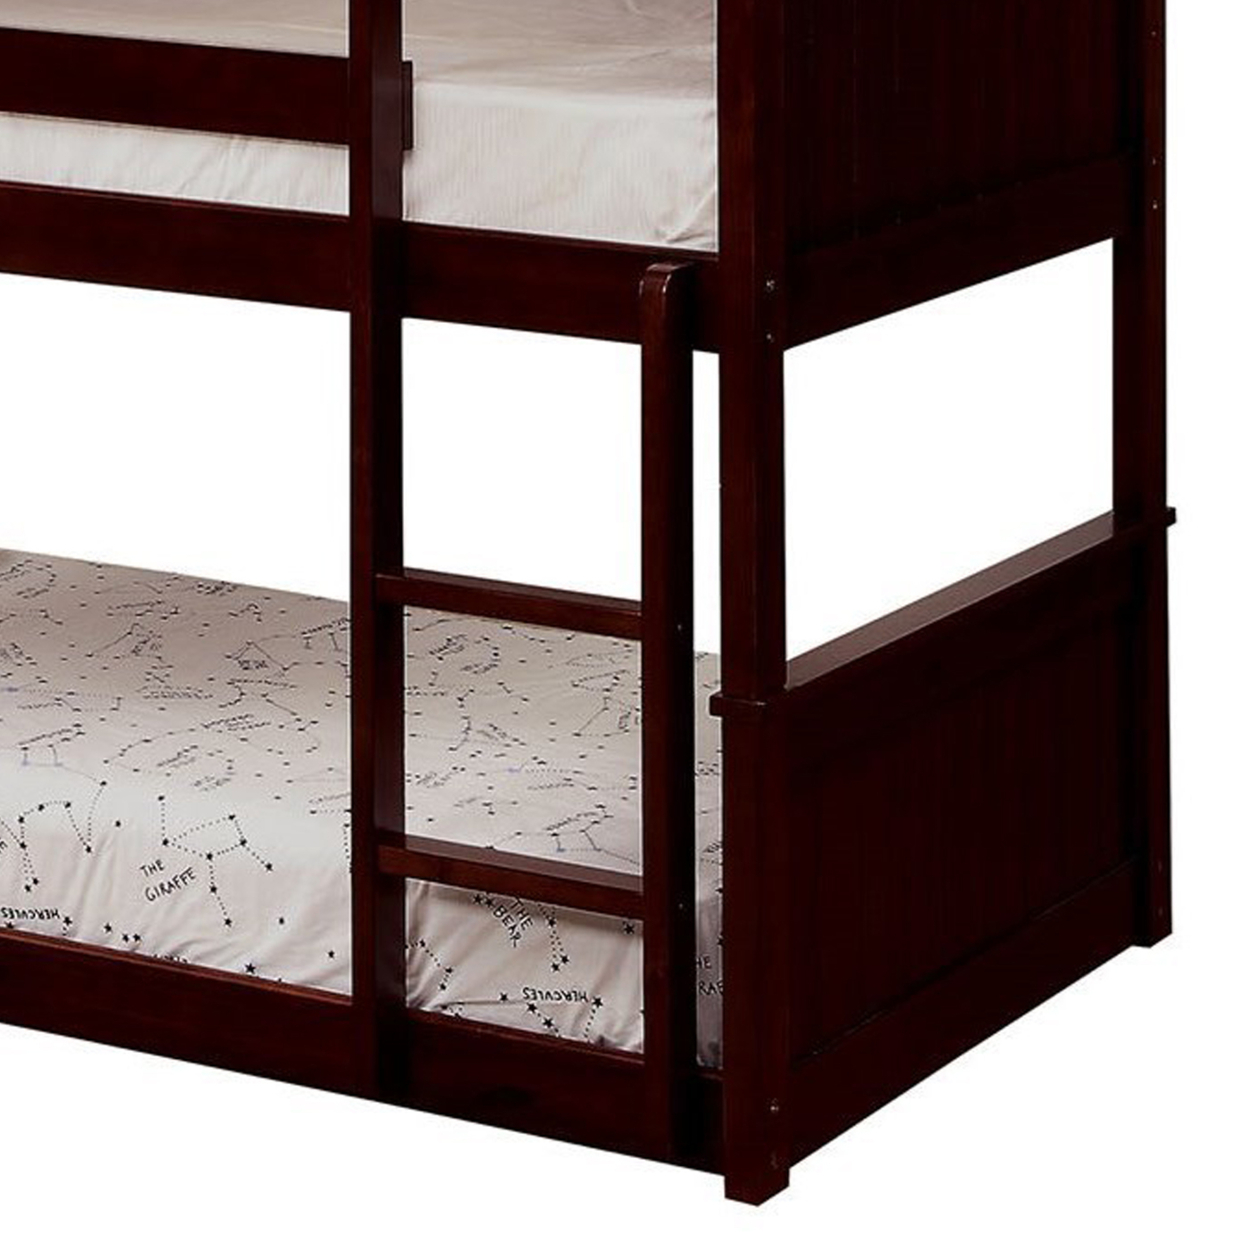 3 Tier Wooden Bunk Bed With Attached Ladders And Slat Base, Brown- Saltoro Sherpi